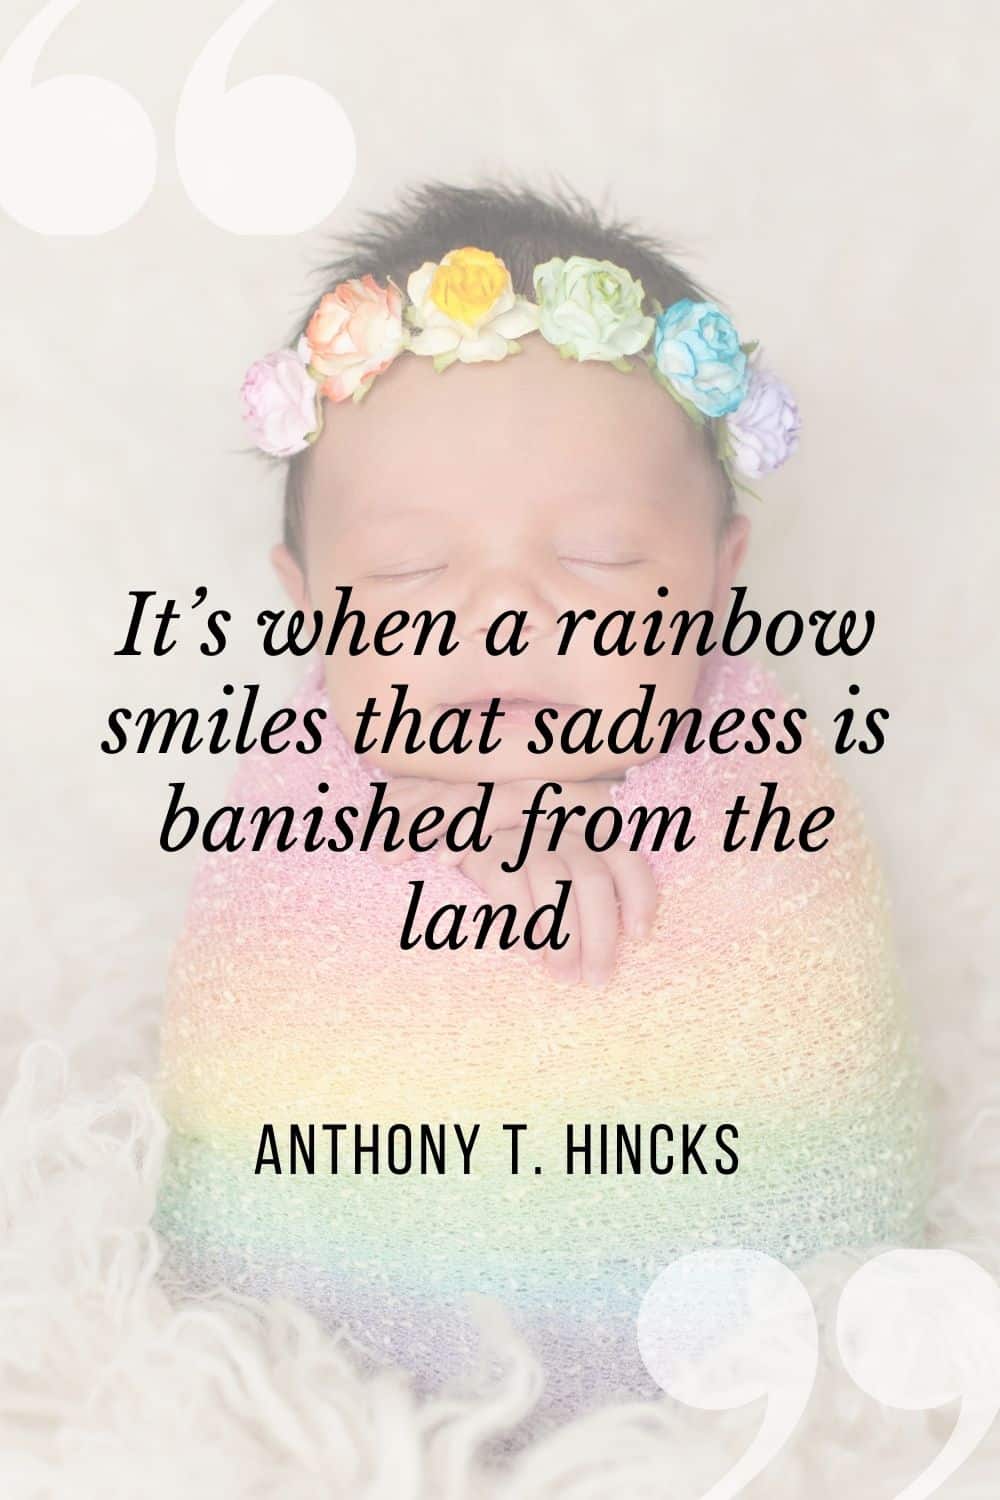 Rainbow baby quote from Anthony Hincks for rainbow baby announcement 